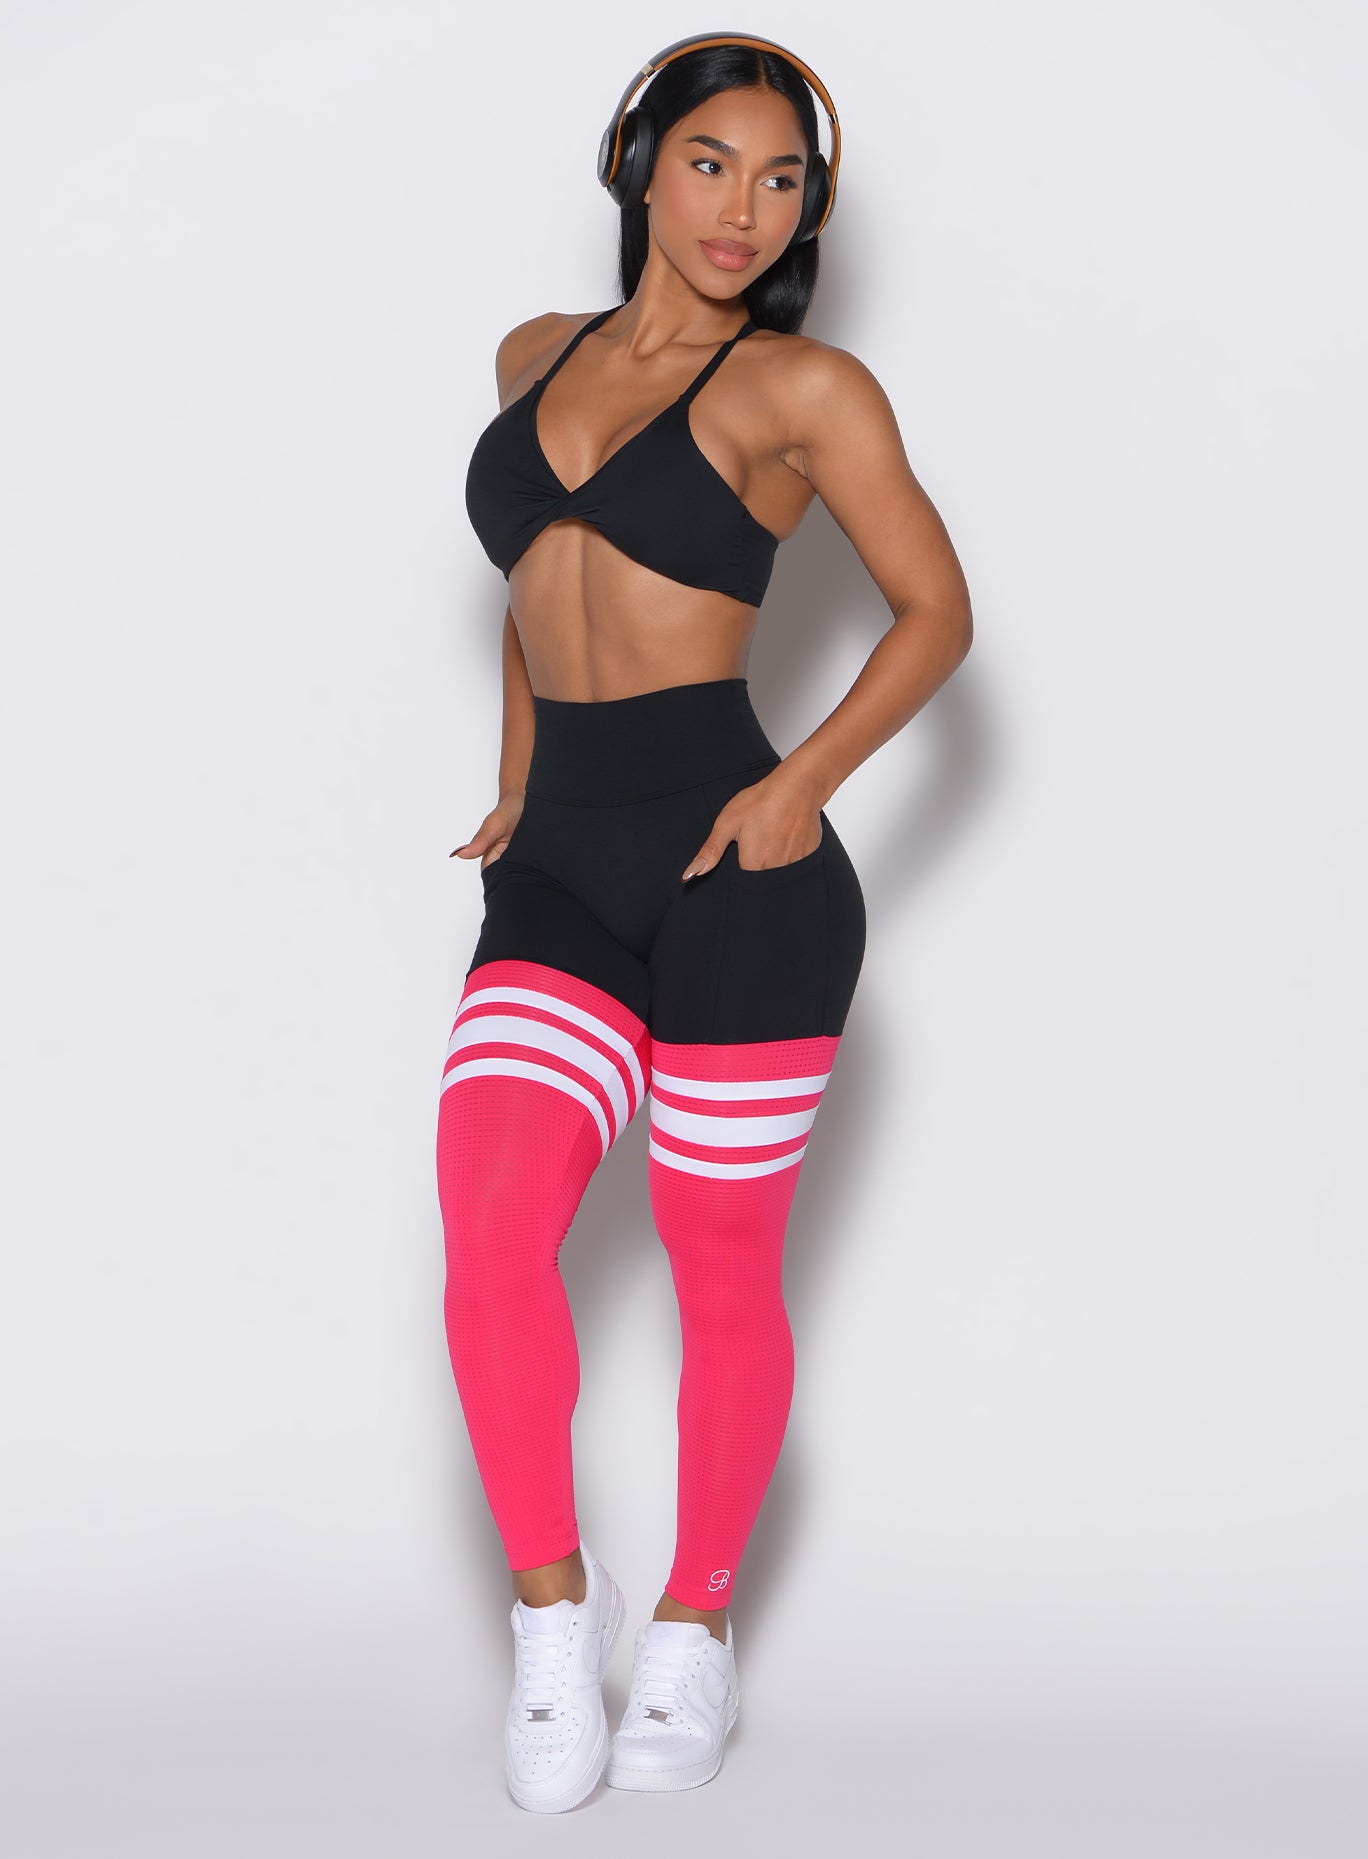 Front left side profile view of a model facing left wearing the Perform Thigh Highs in Black Sky color along with a black sports bra